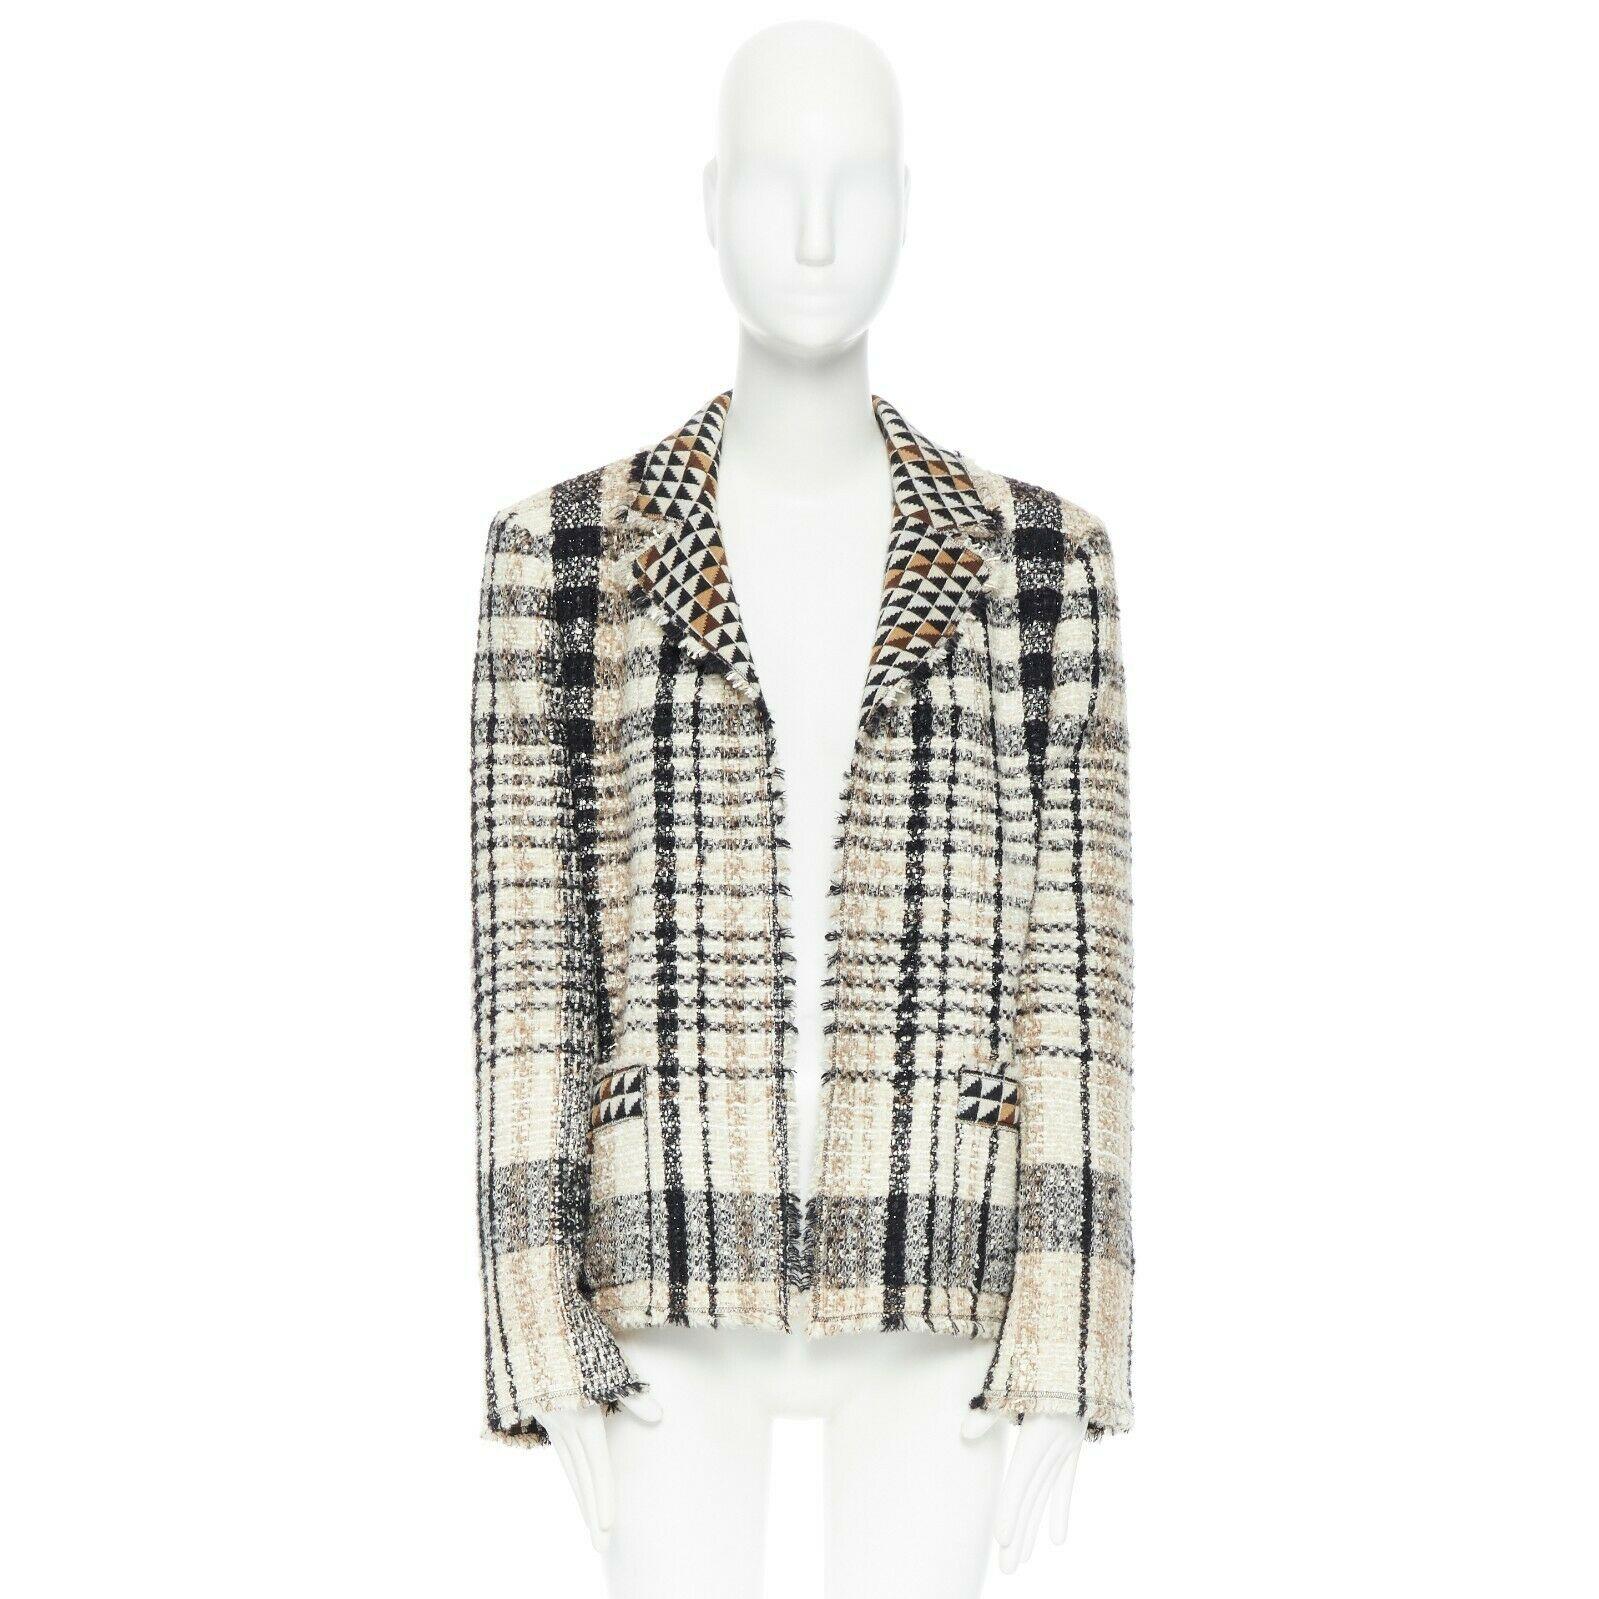 runway MEN'S CHANEL 04A plaid fantasy tweed cashmere lined boxy jacket  FR42
Brand: CHANEL
Designer: Karl Lagerfeld
Collection: 04A
Model Name / Style: Tweed jacket
Material: Wool with cashmere lining
Color: Grey, beige, ivory, black
Pattern: